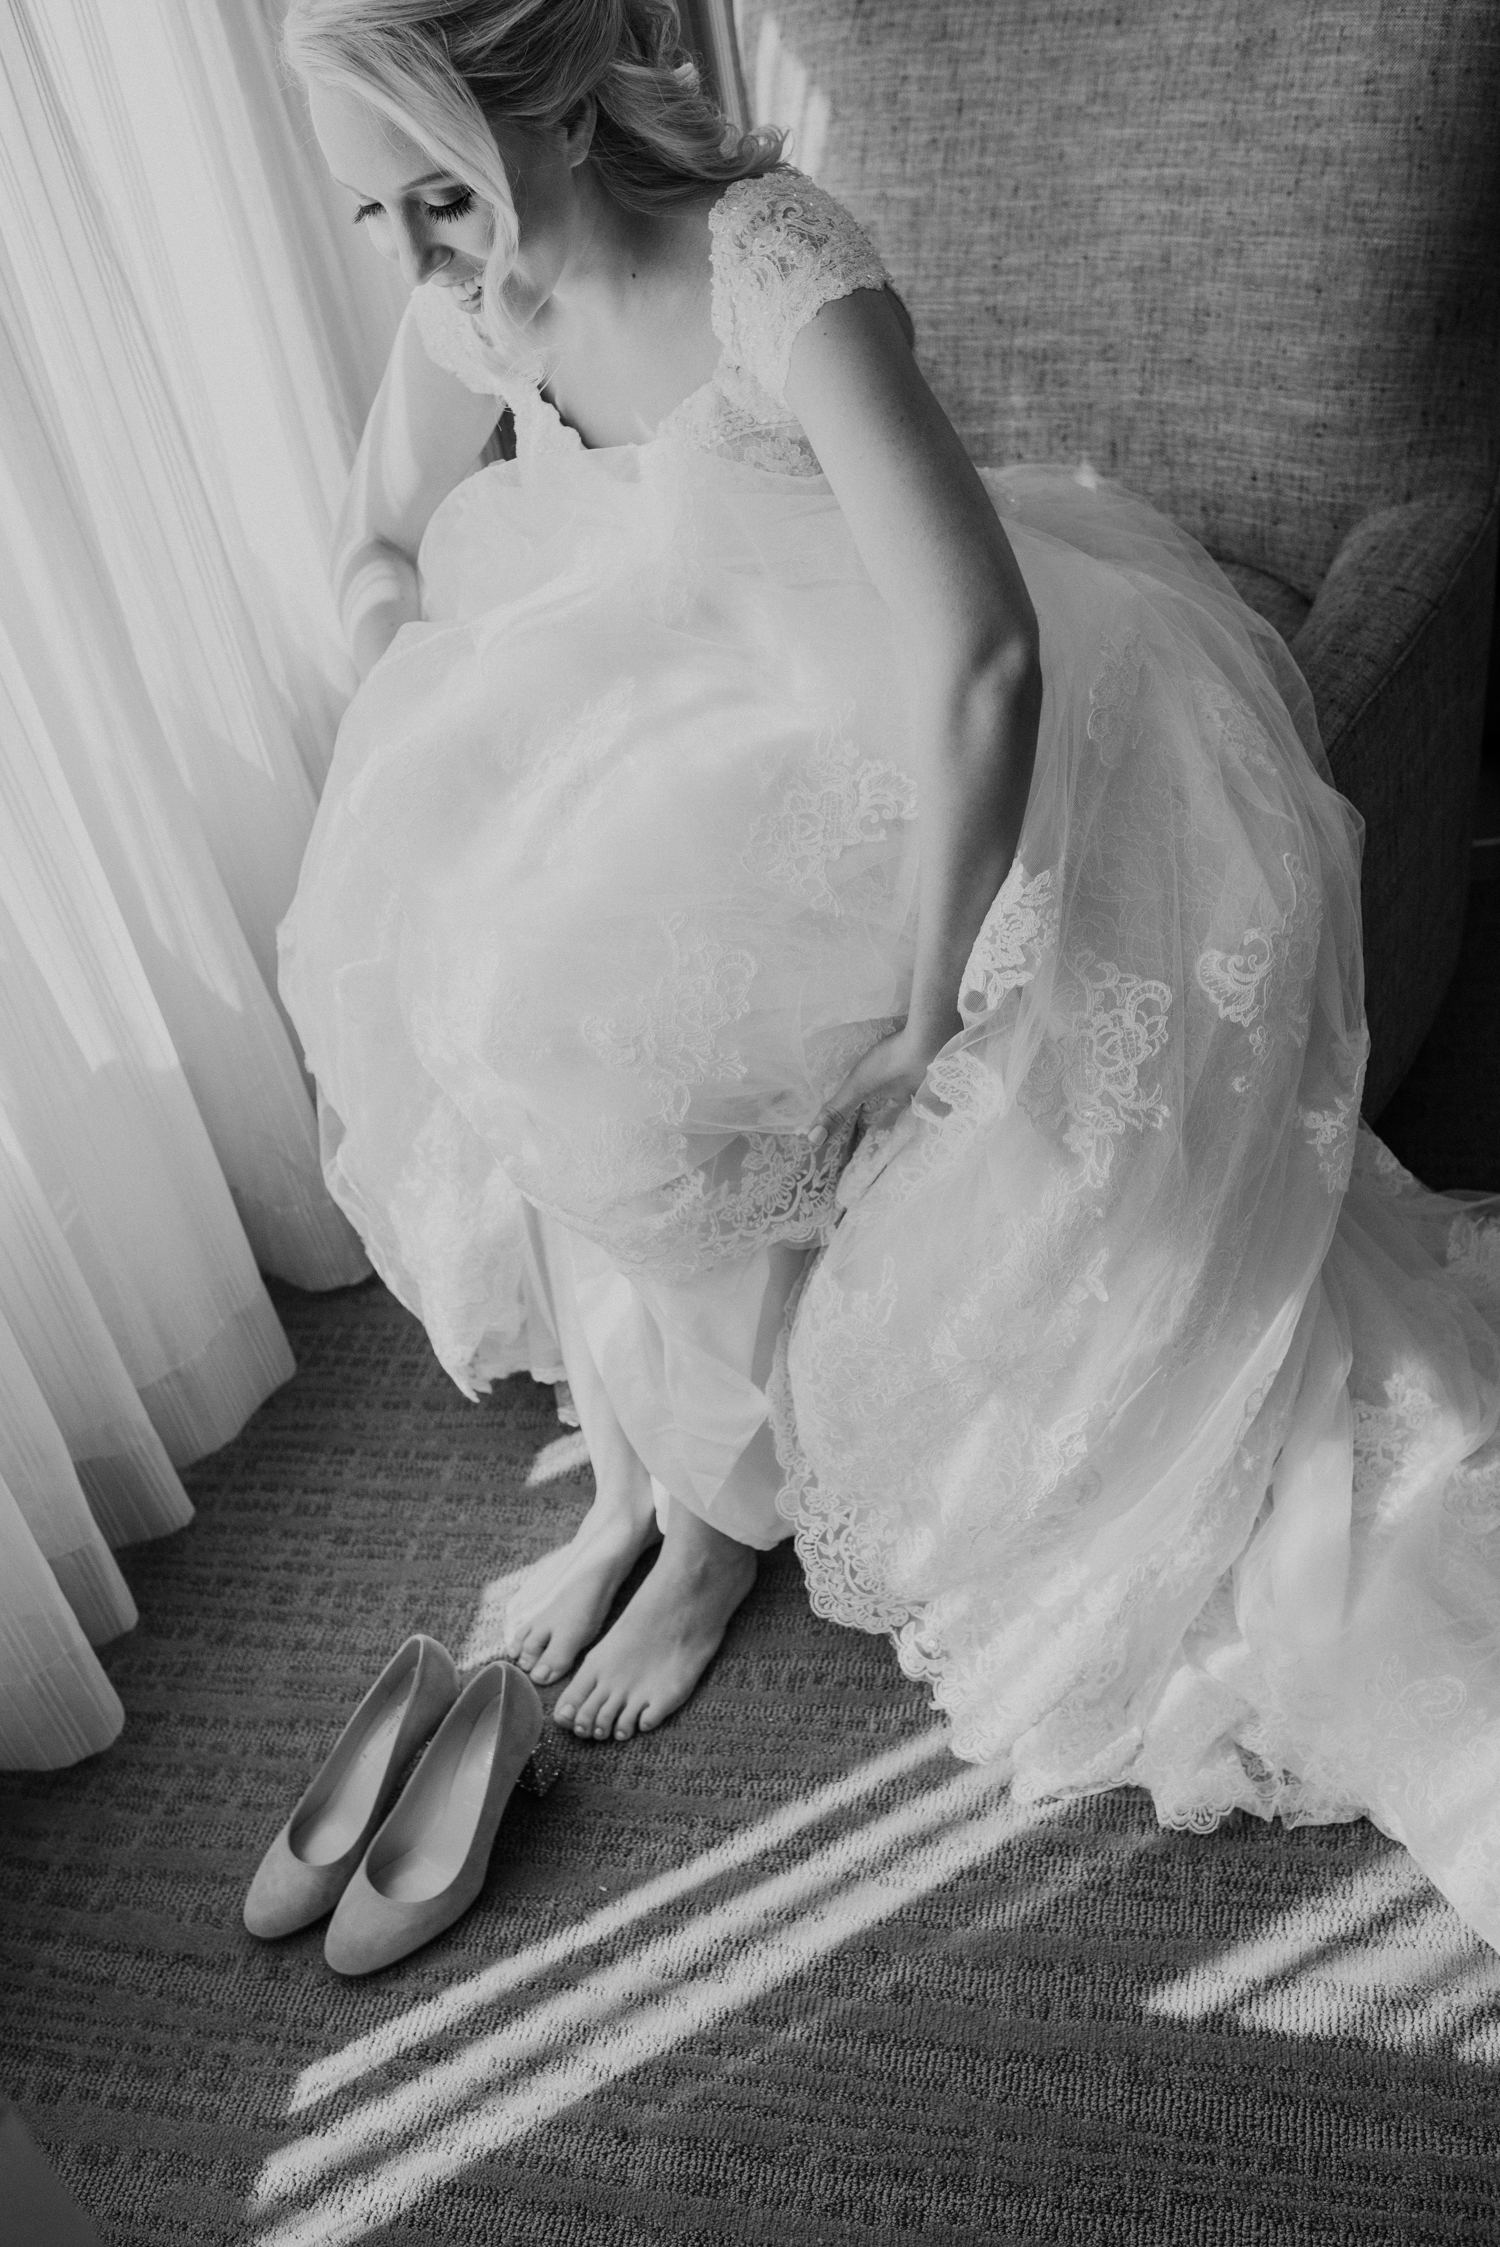 A bride gets ready to put on her shoes before her wedding day at Lansdowne Resort.